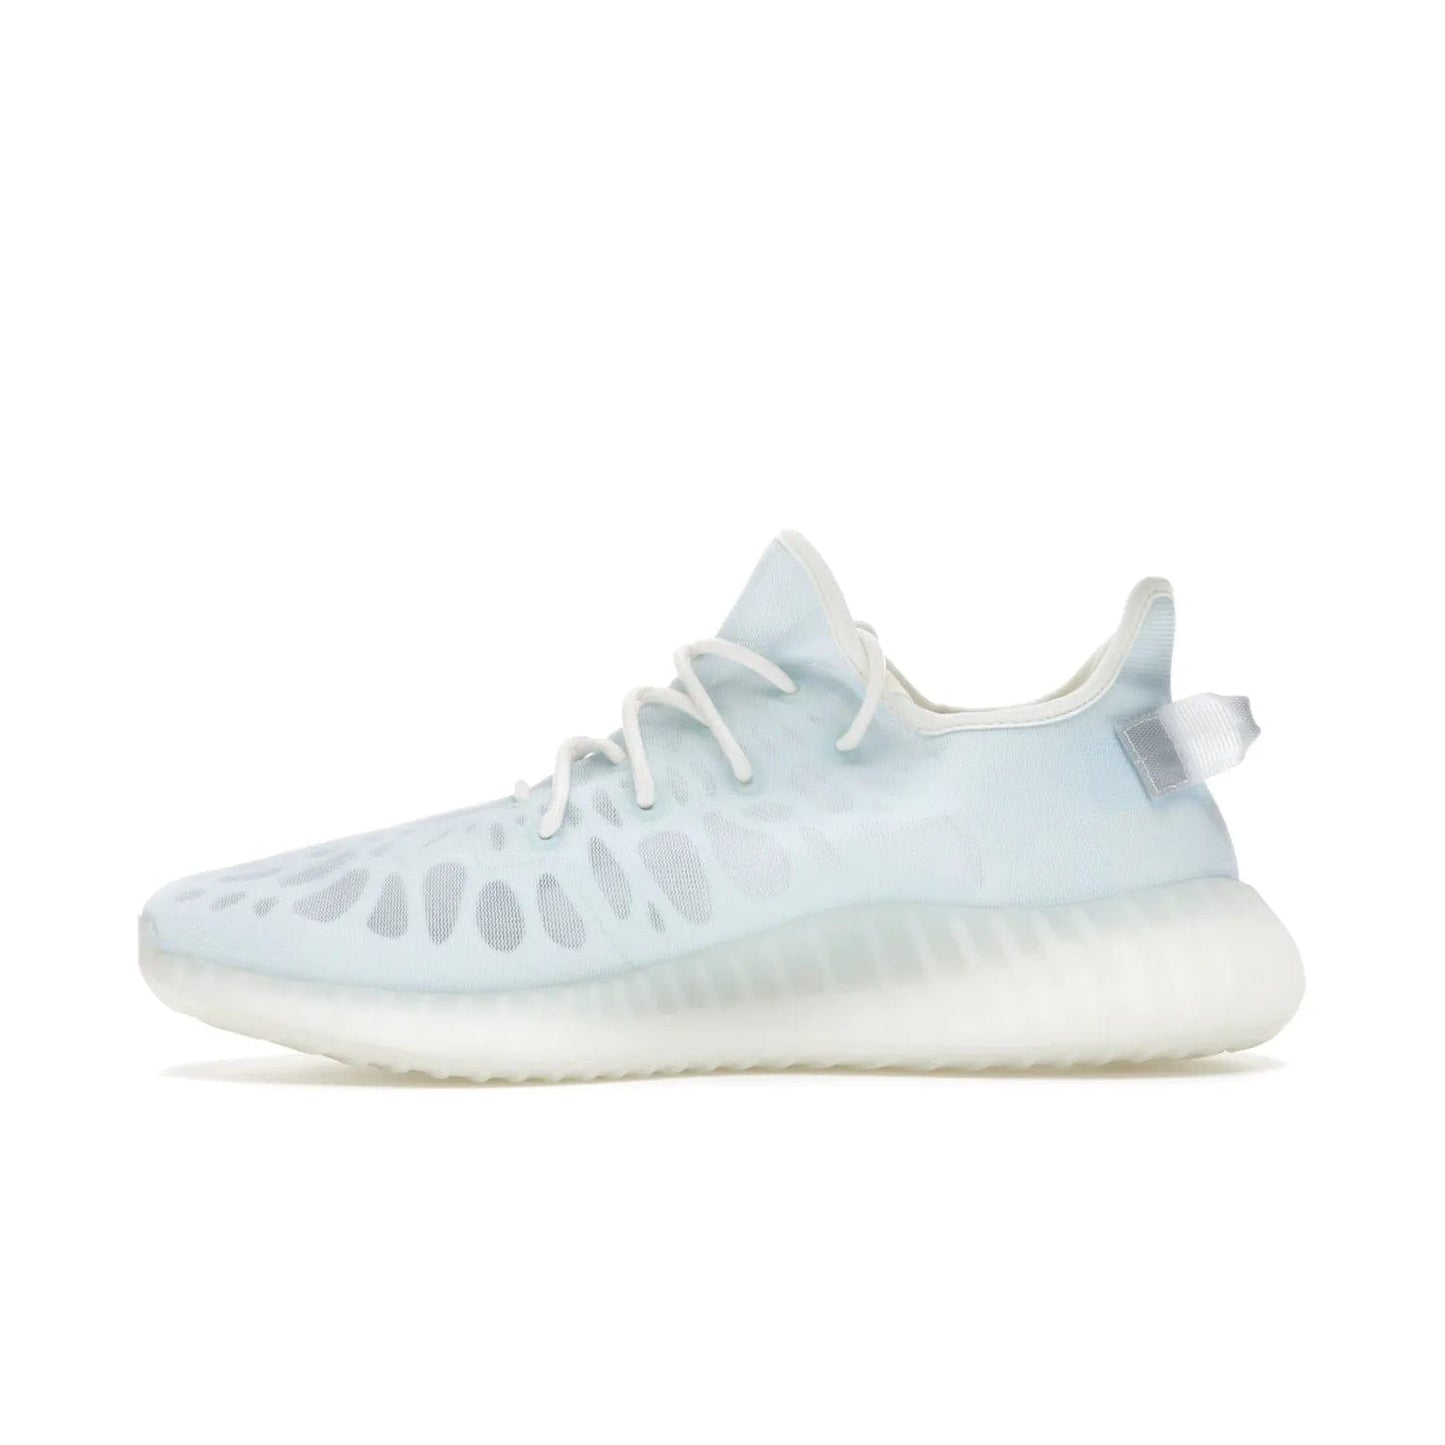 adidas Yeezy Boost 350 V2 Mono Ice - Image 19 - Only at www.BallersClubKickz.com - Introducing the adidas Yeezy 350 V2 Mono Ice - a sleek monofilament mesh design in Ice blue with Boost sole and heel pull tab. Released exclusively in the US for $220.